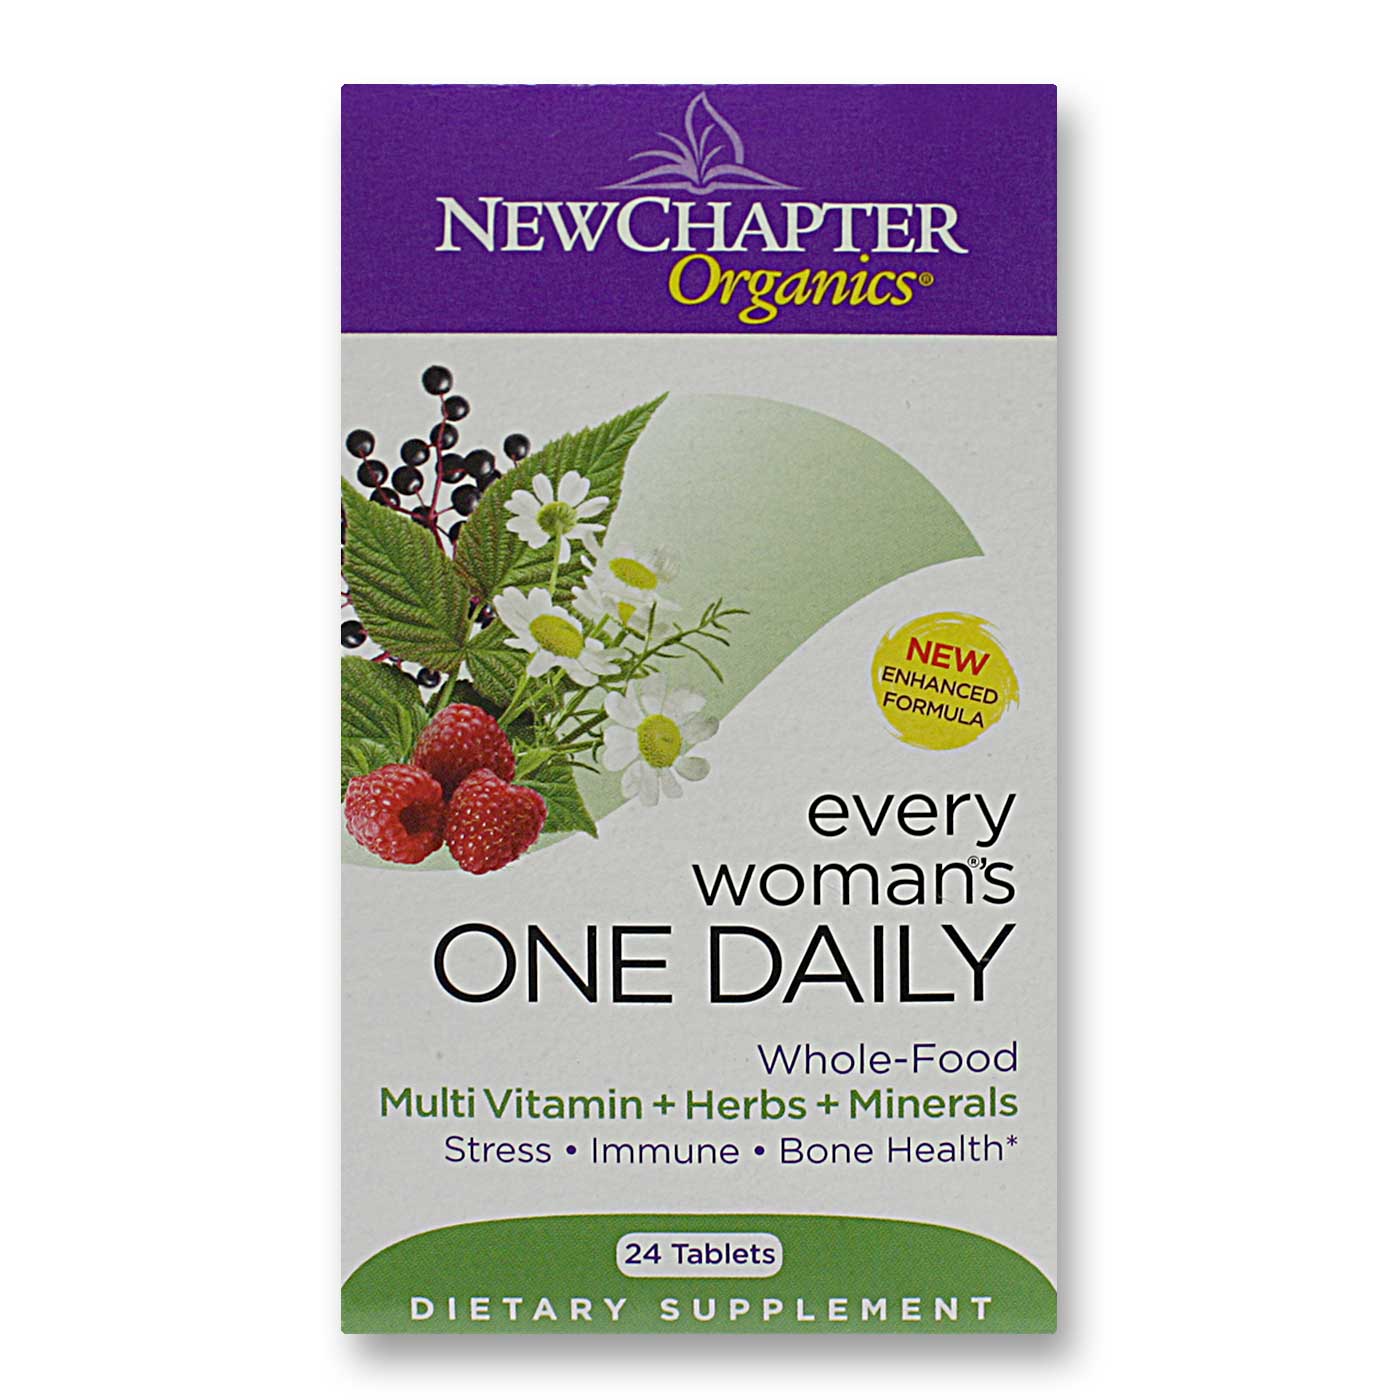 New Chapter - Every Woman's One Daily 	$9.98  + Free Shipping 